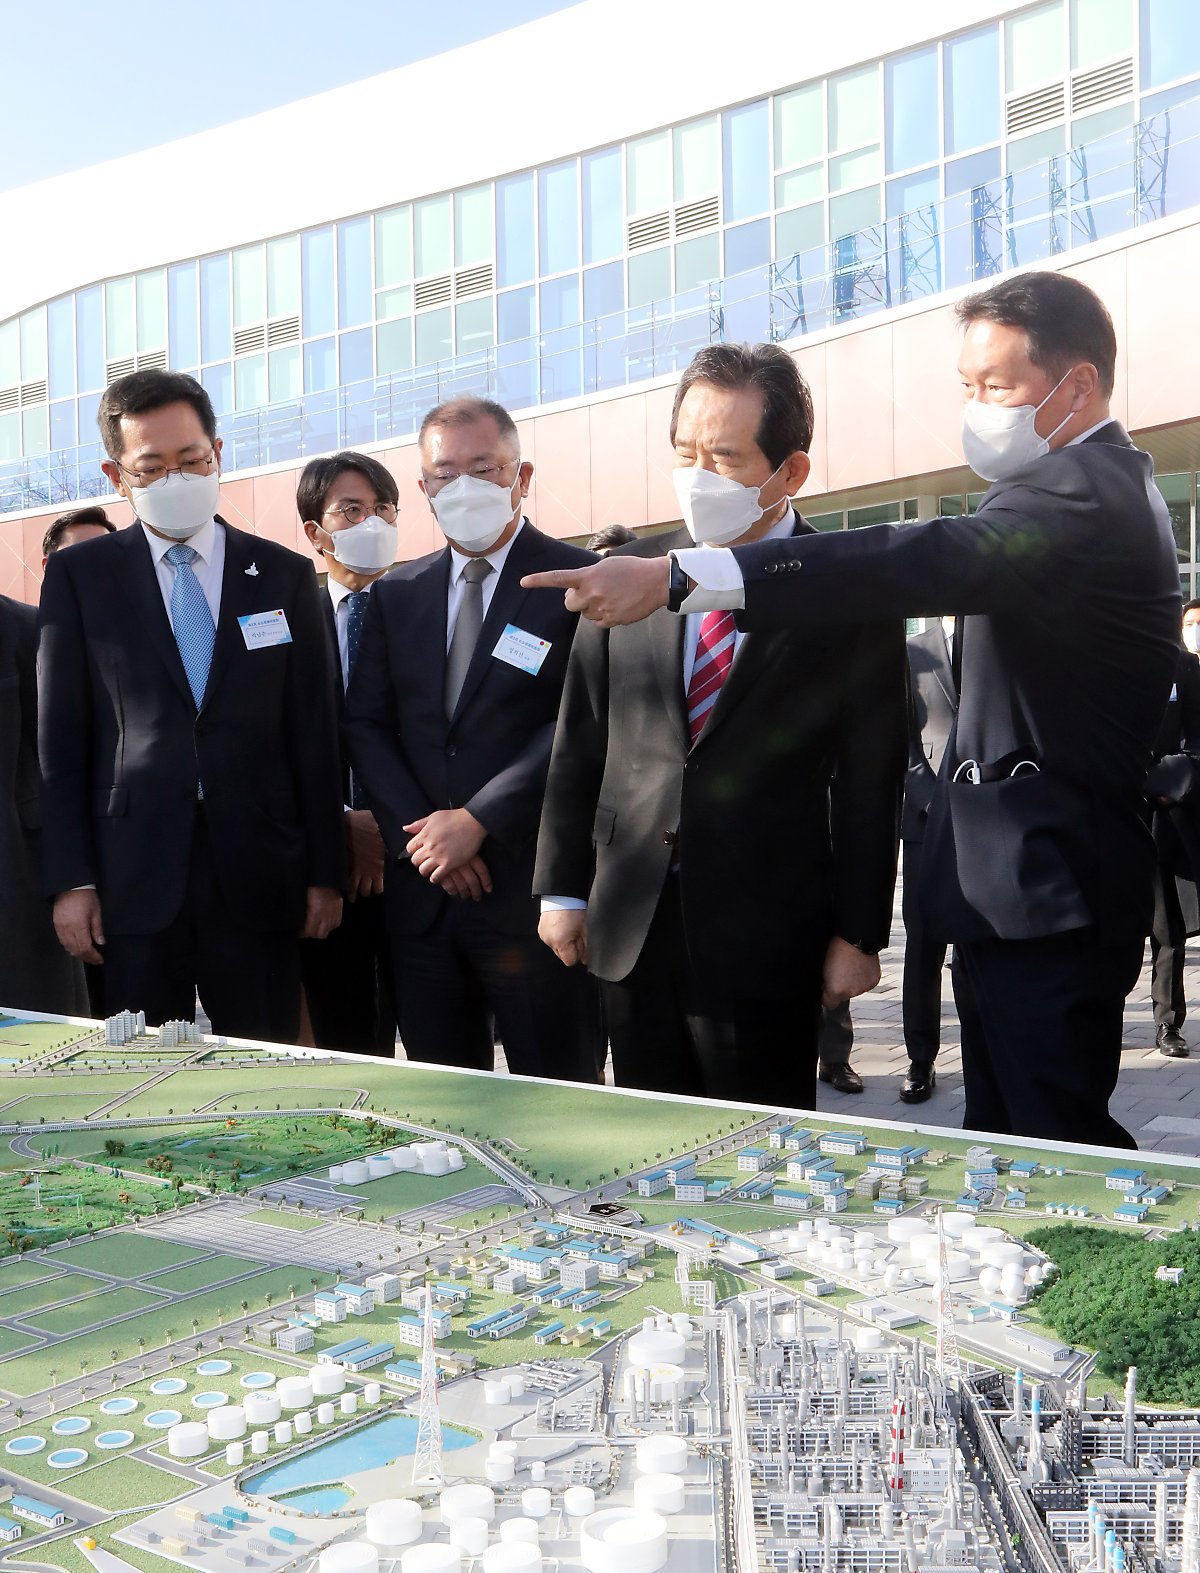 Prime Minister Chung Sye-kyun, second from right, looks at a model of a hydrogen plant at the factory of SK Incheon Petrochem on March 2, with SK Chairman Chey Tae-won, first from right, and Hyundai Motor Chairman Chung Euisun, third from right. (Yonhap)